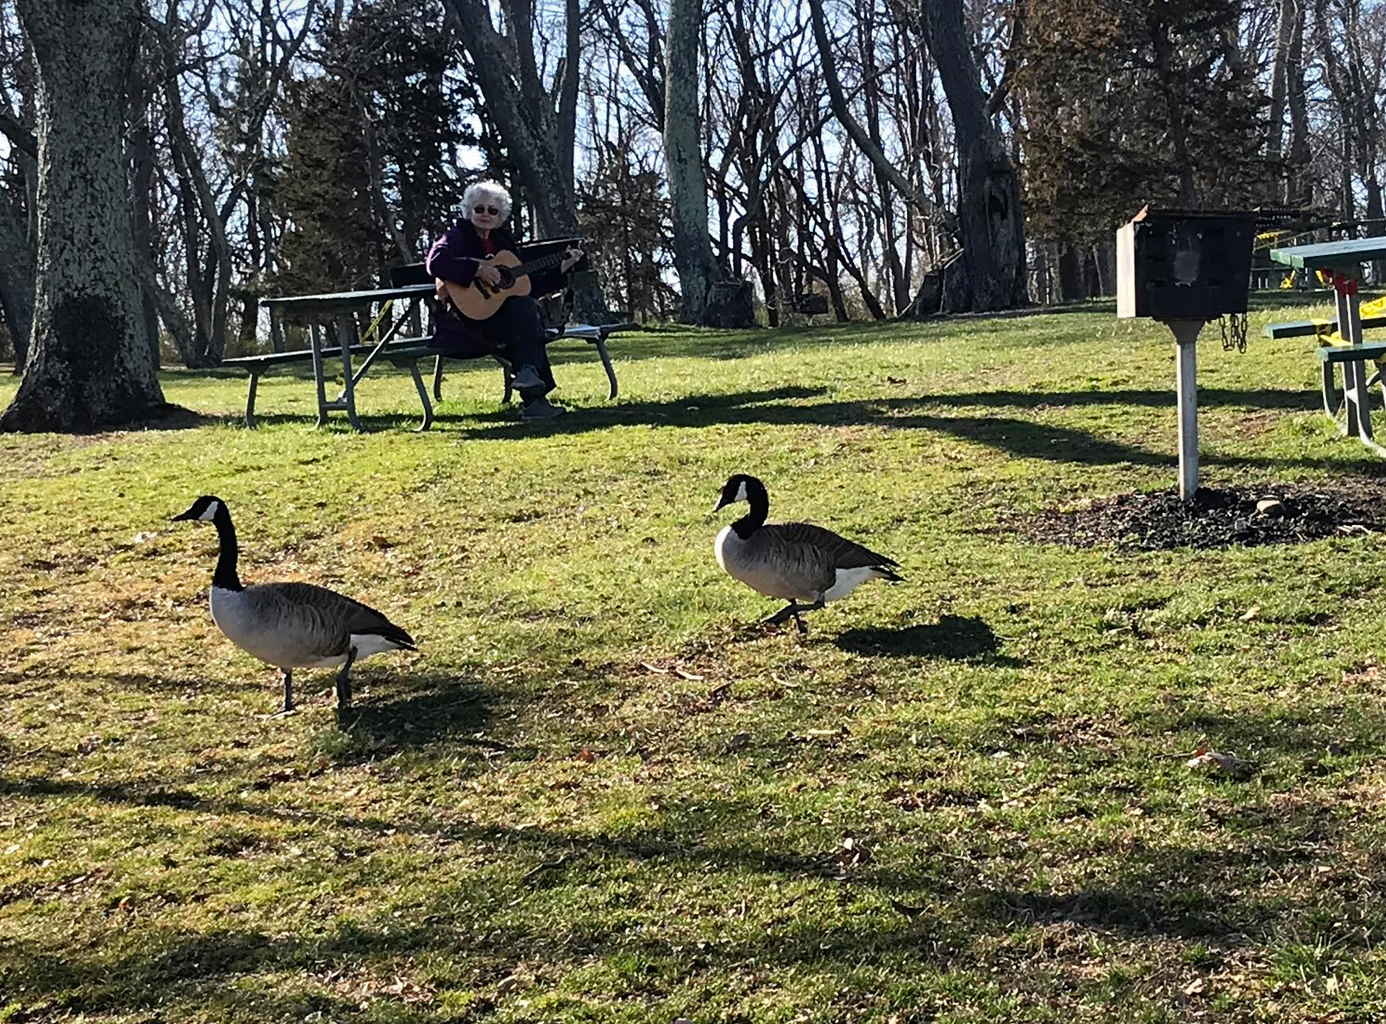 A woman strums a guitar at one of the tables roped off with caution tape as two geese walked past. March 21, 2020 Photo: Leslie Yager